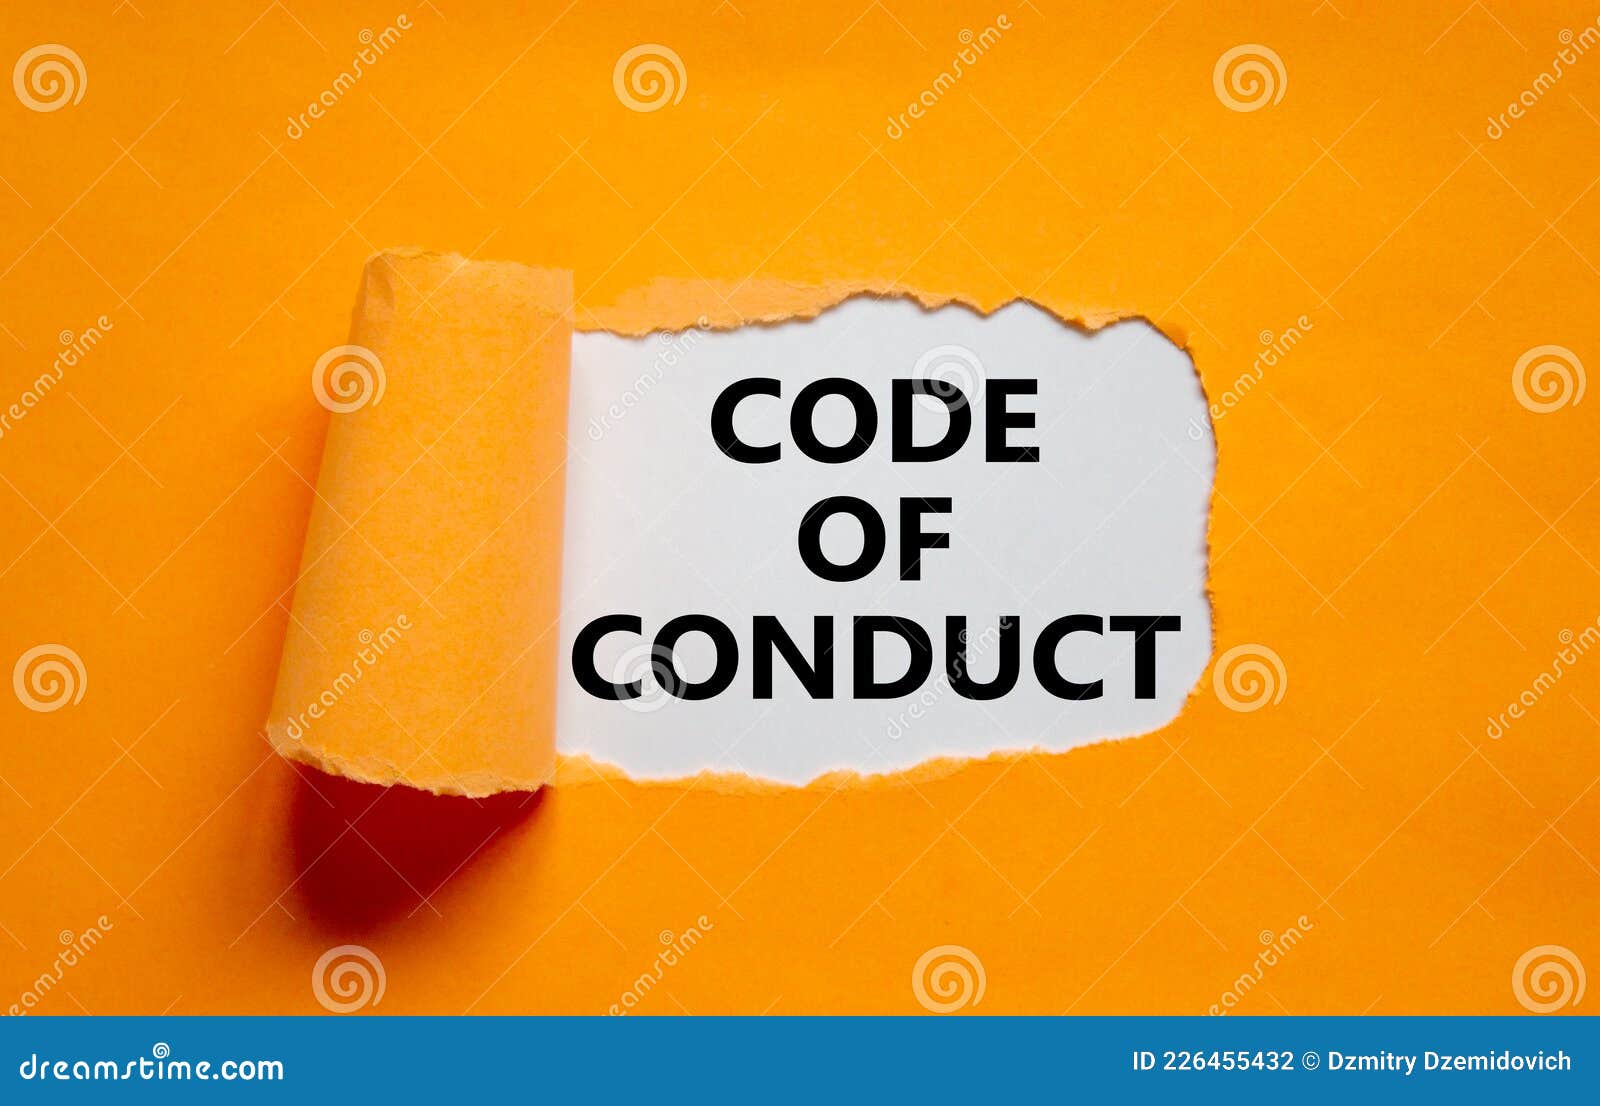 code of conduct . words `code of conduct` appearing behind torn orange paper. beautiful orange background. business, code